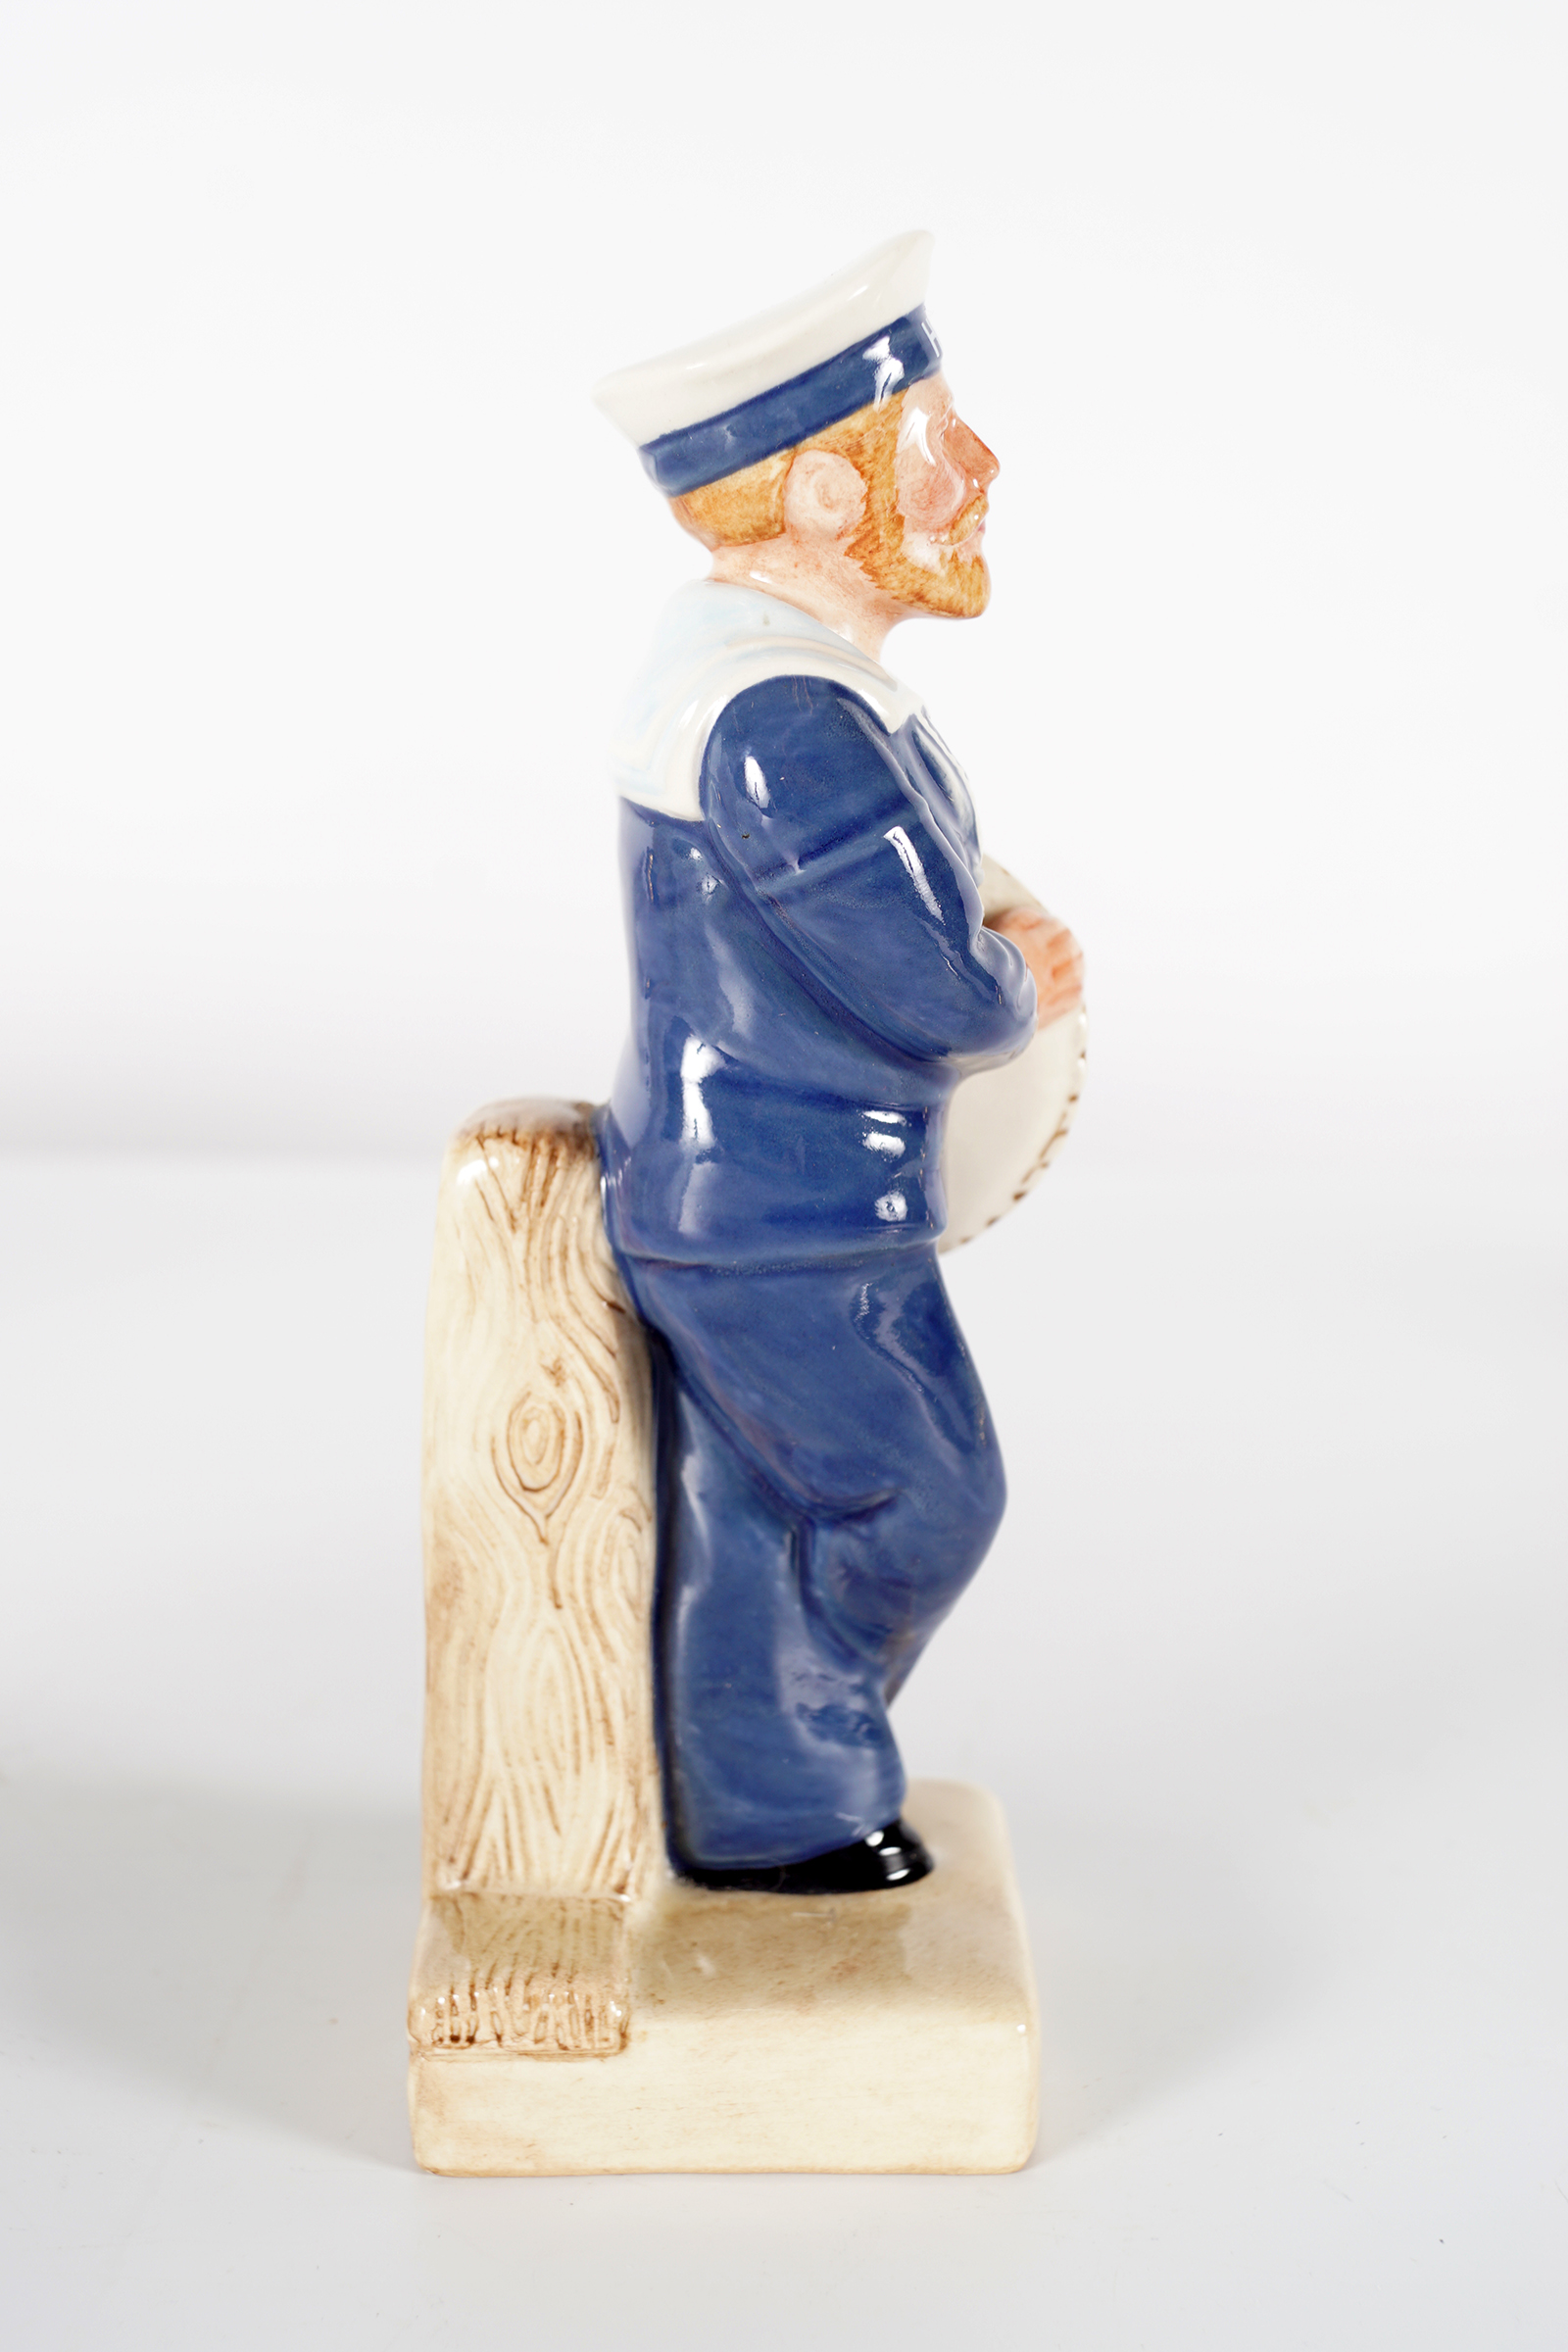 ROYAL DOULTON PLAYER'S NAVY CUT FIGURINE - Image 2 of 3